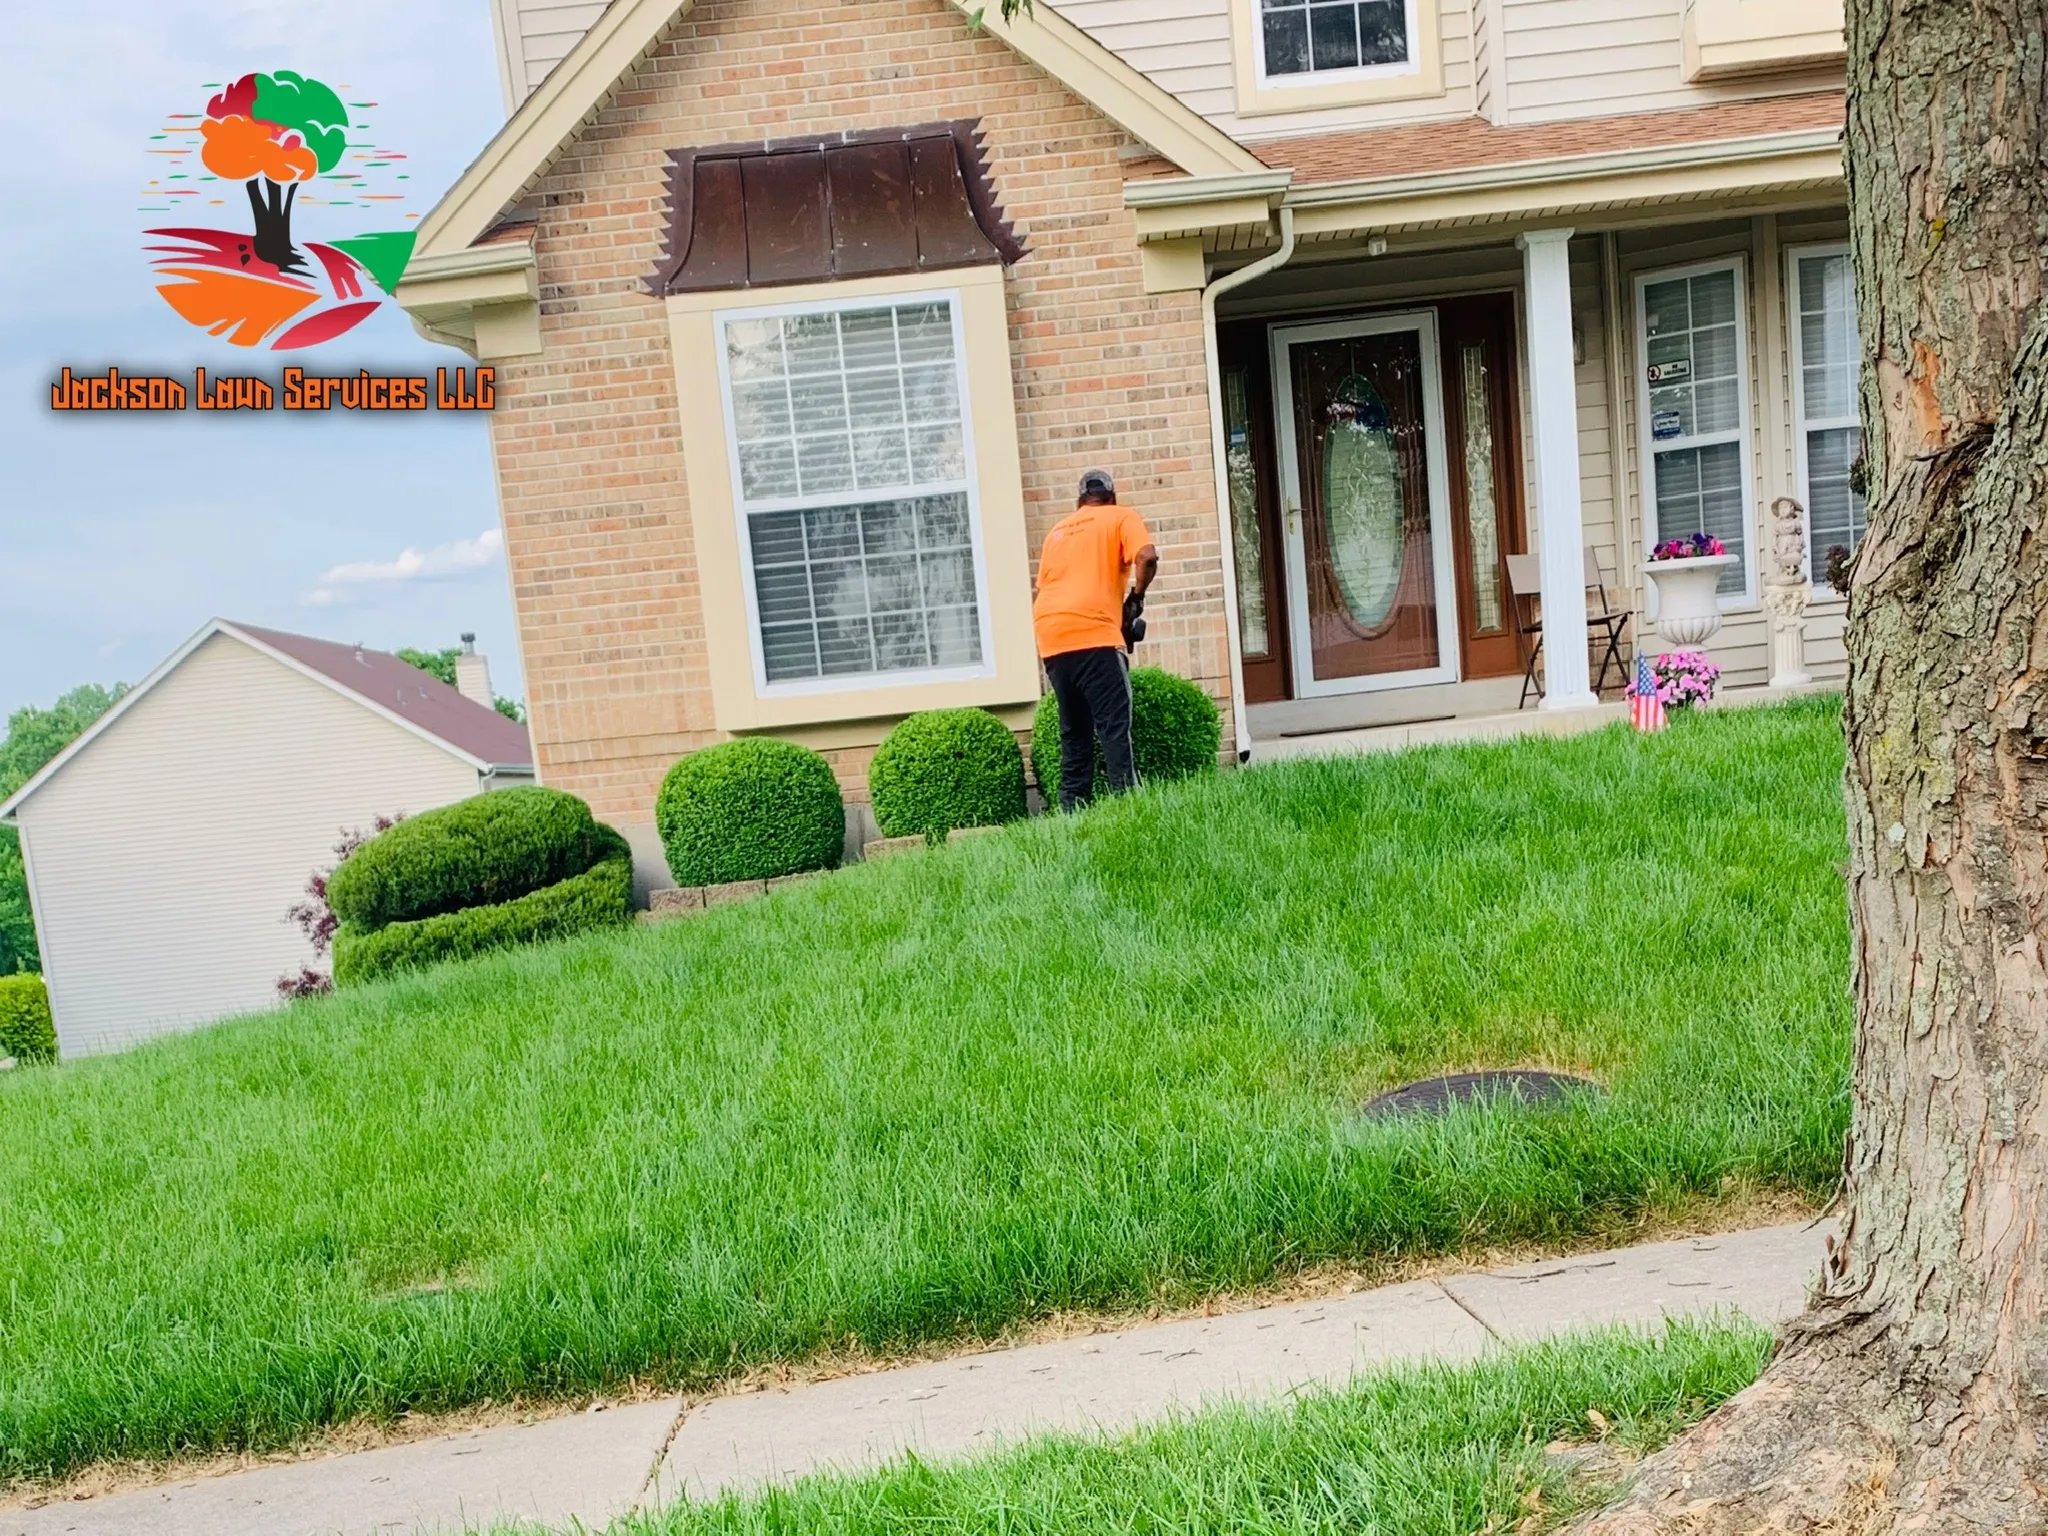 Hedge Trimming for Jackson Lawn Services LLC in Florissant , MO